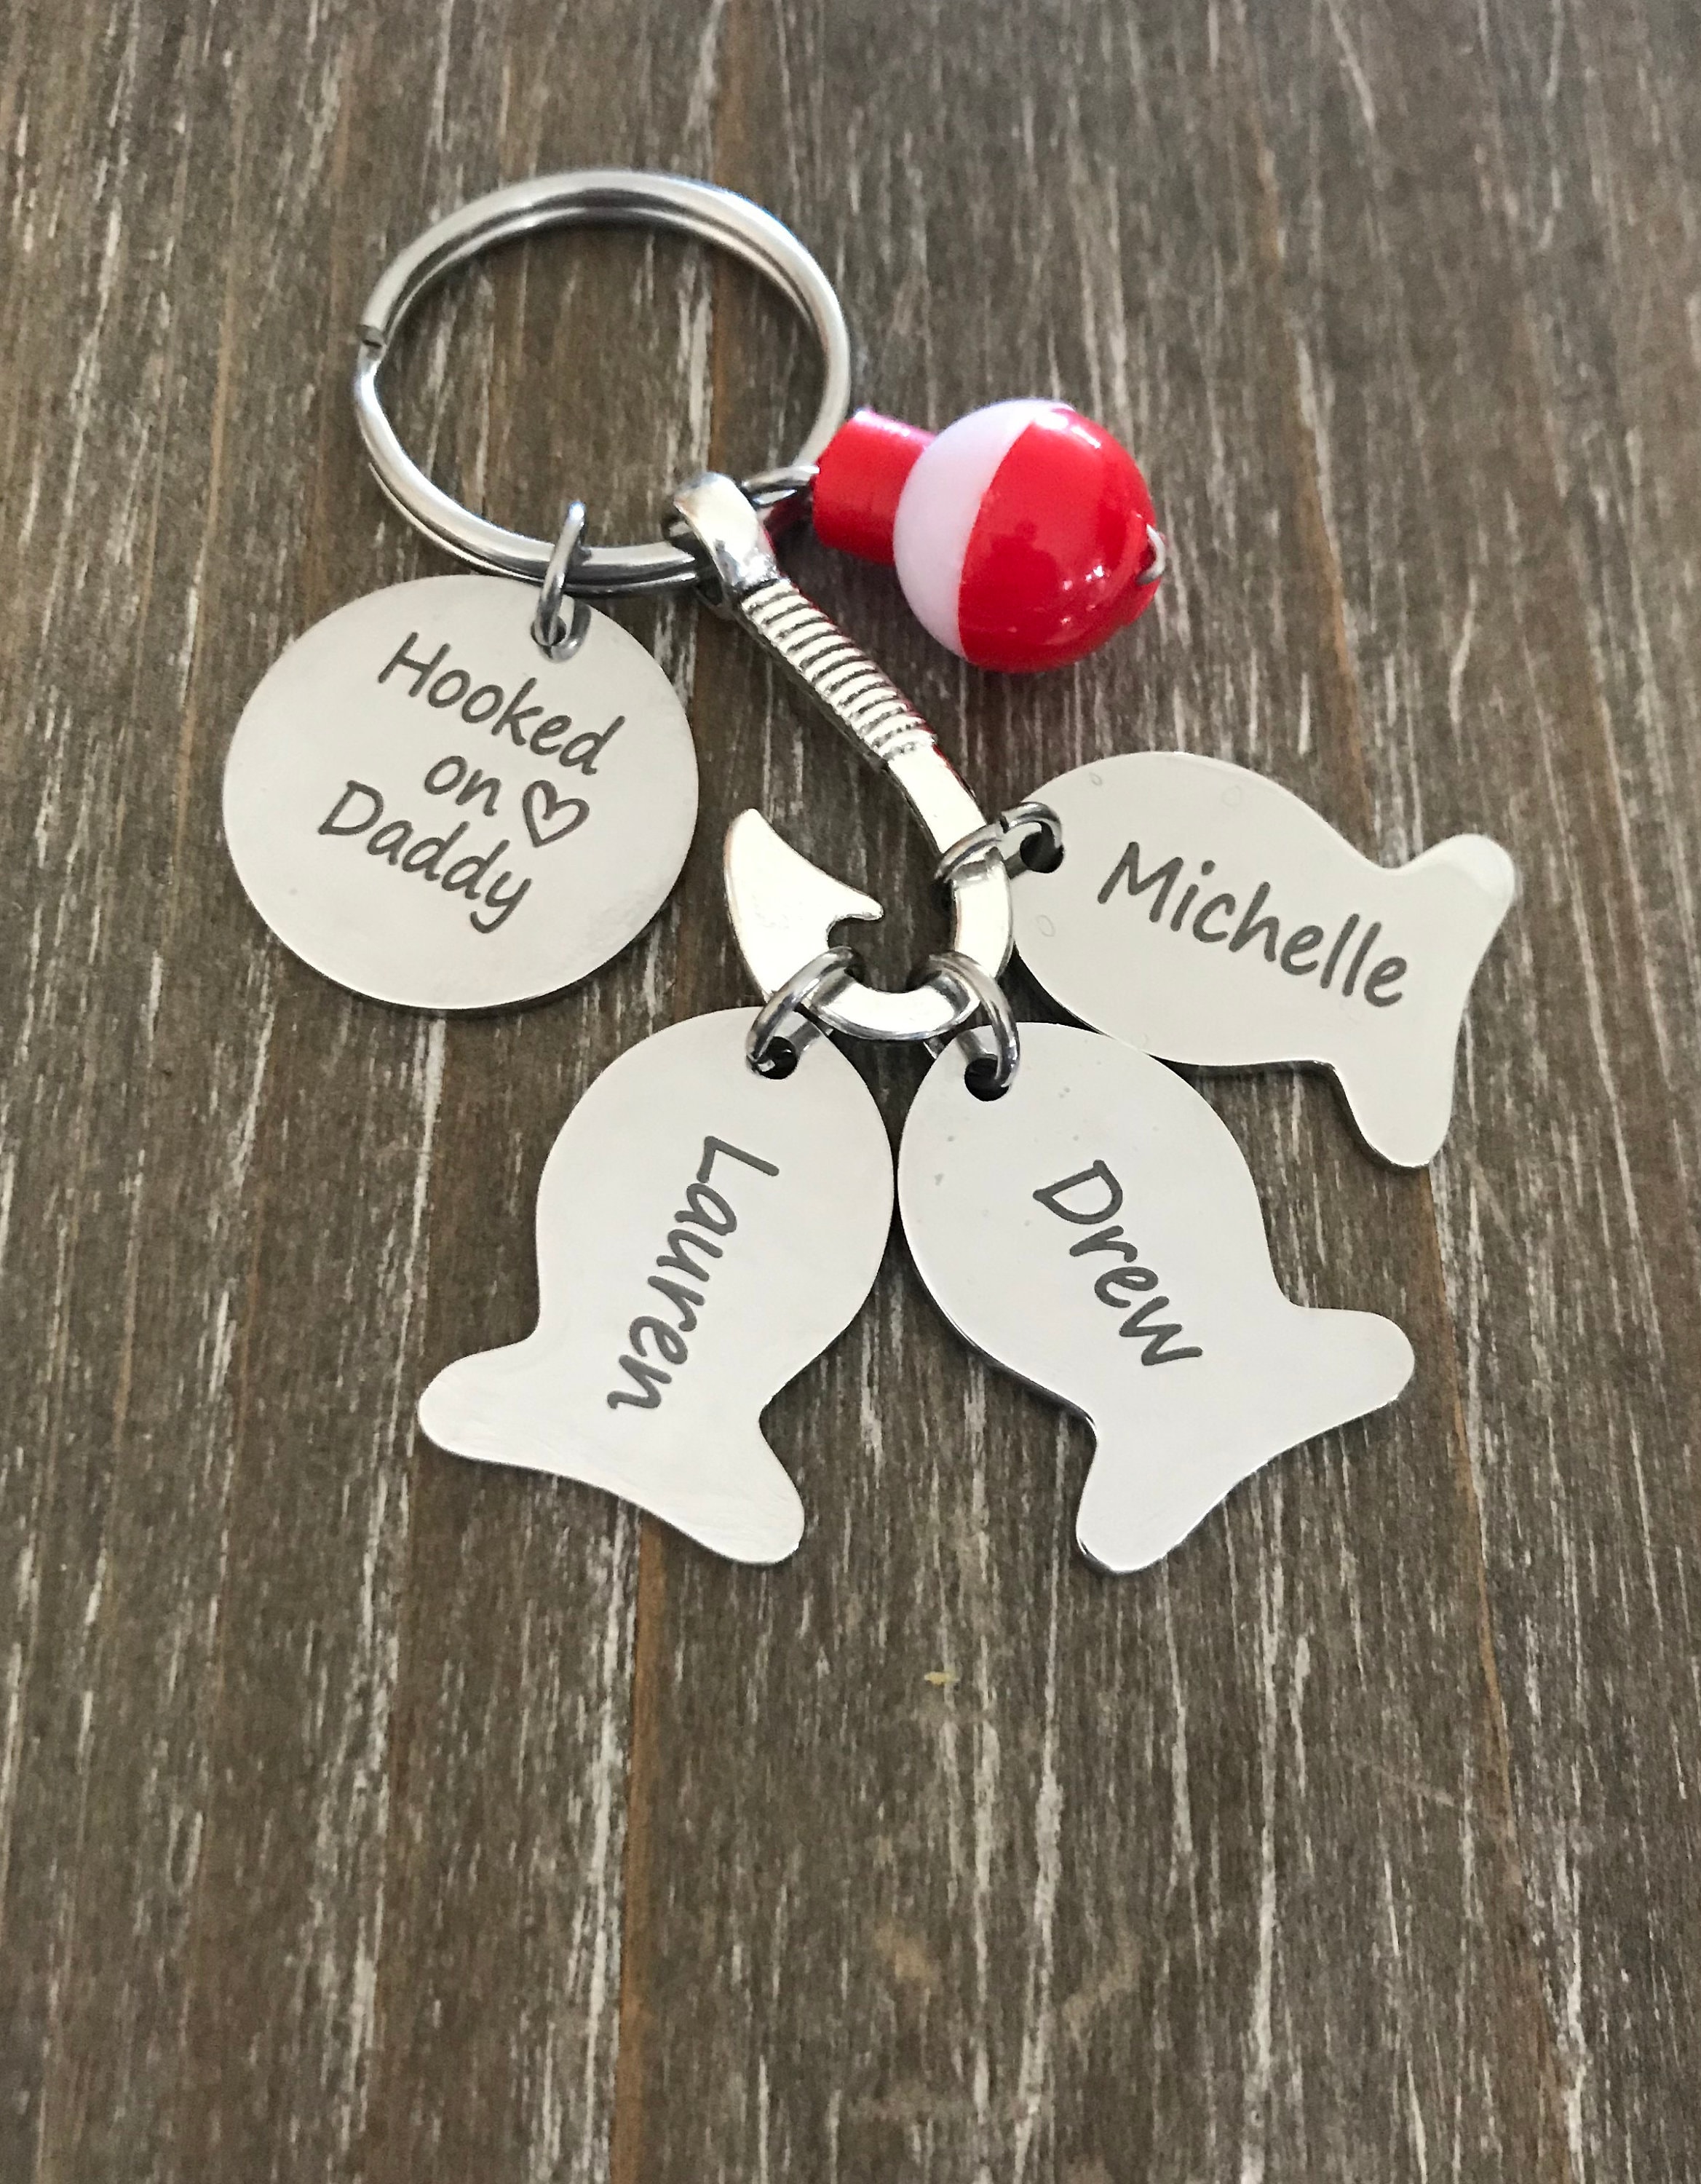 Hooked on Daddy Keychain 